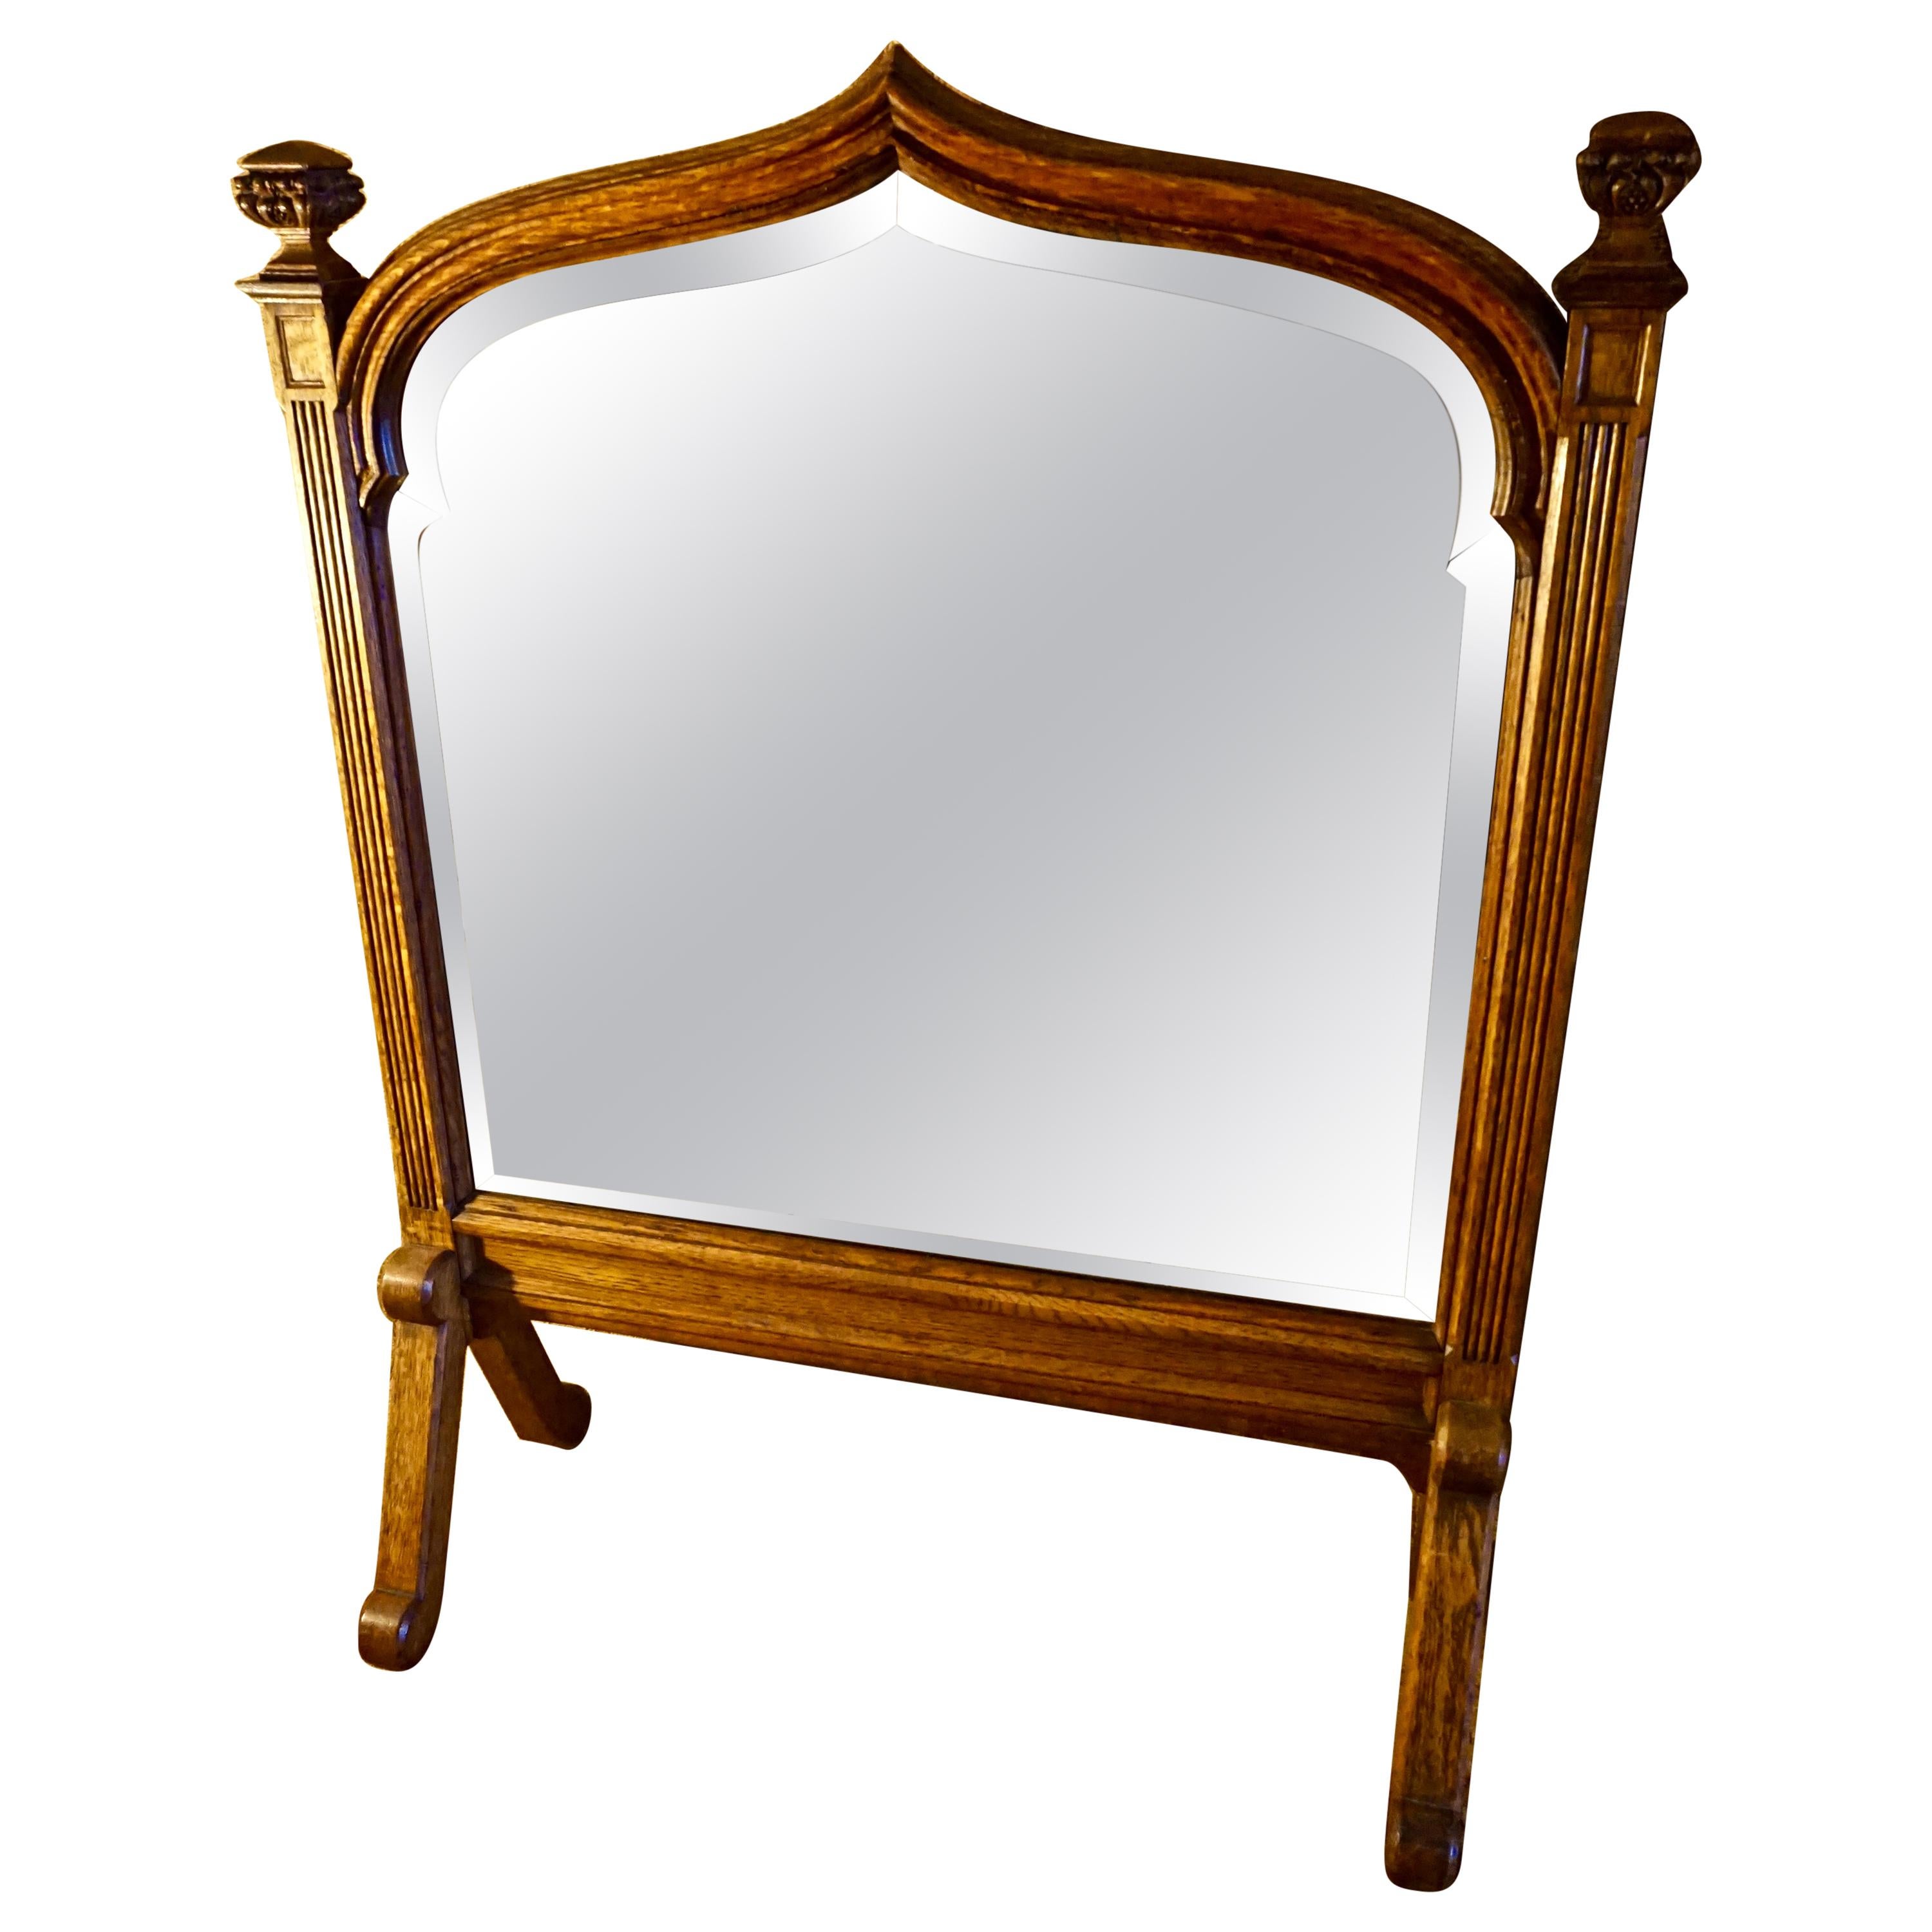 Gothic Revival English Oak Bevel Shield Shape Stand Mirror with Finials